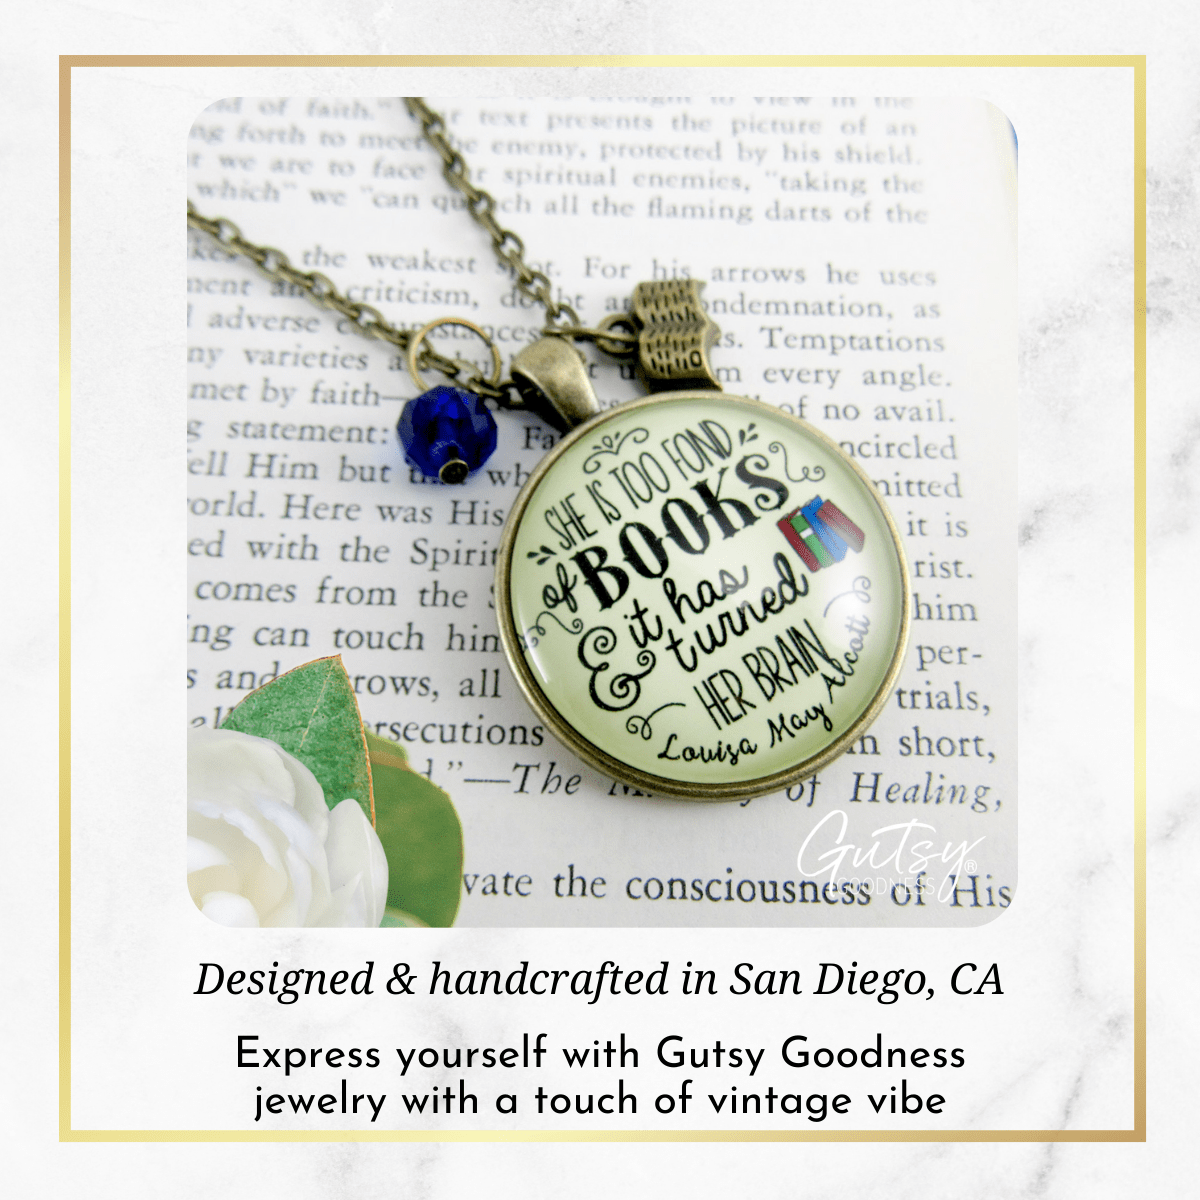 Gutsy Goodness Readers Necklace She Too Fond Of Books Louisa May Alcott Quote Jewelry Red Charm - Gutsy Goodness Handmade Jewelry;Readers Necklace She Too Fond Of Books Louisa May Alcott Quote Jewelry Red Charm - Gutsy Goodness Handmade Jewelry Gifts